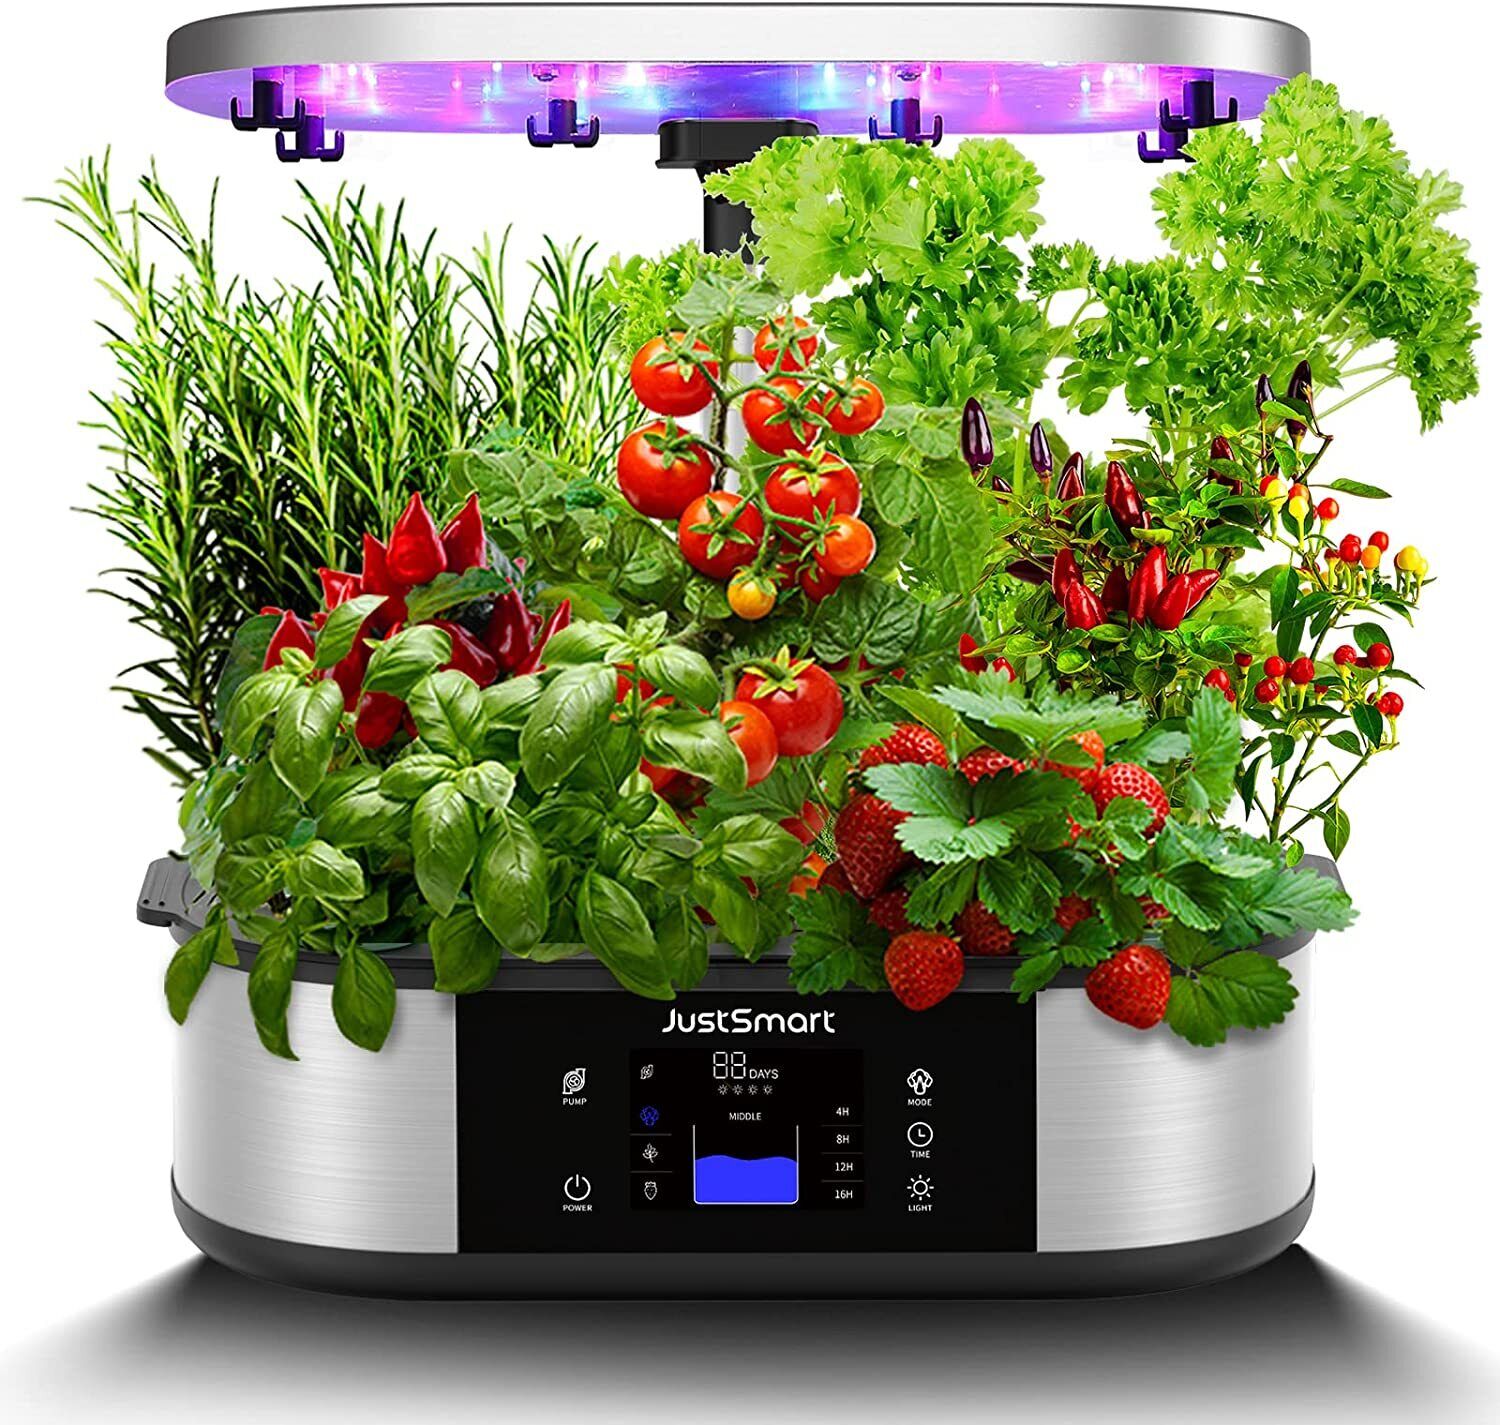 Upgraded 2 in 1 Hydroponics Growing System 12 Pods Indoor Herb Garden Kit w/LED